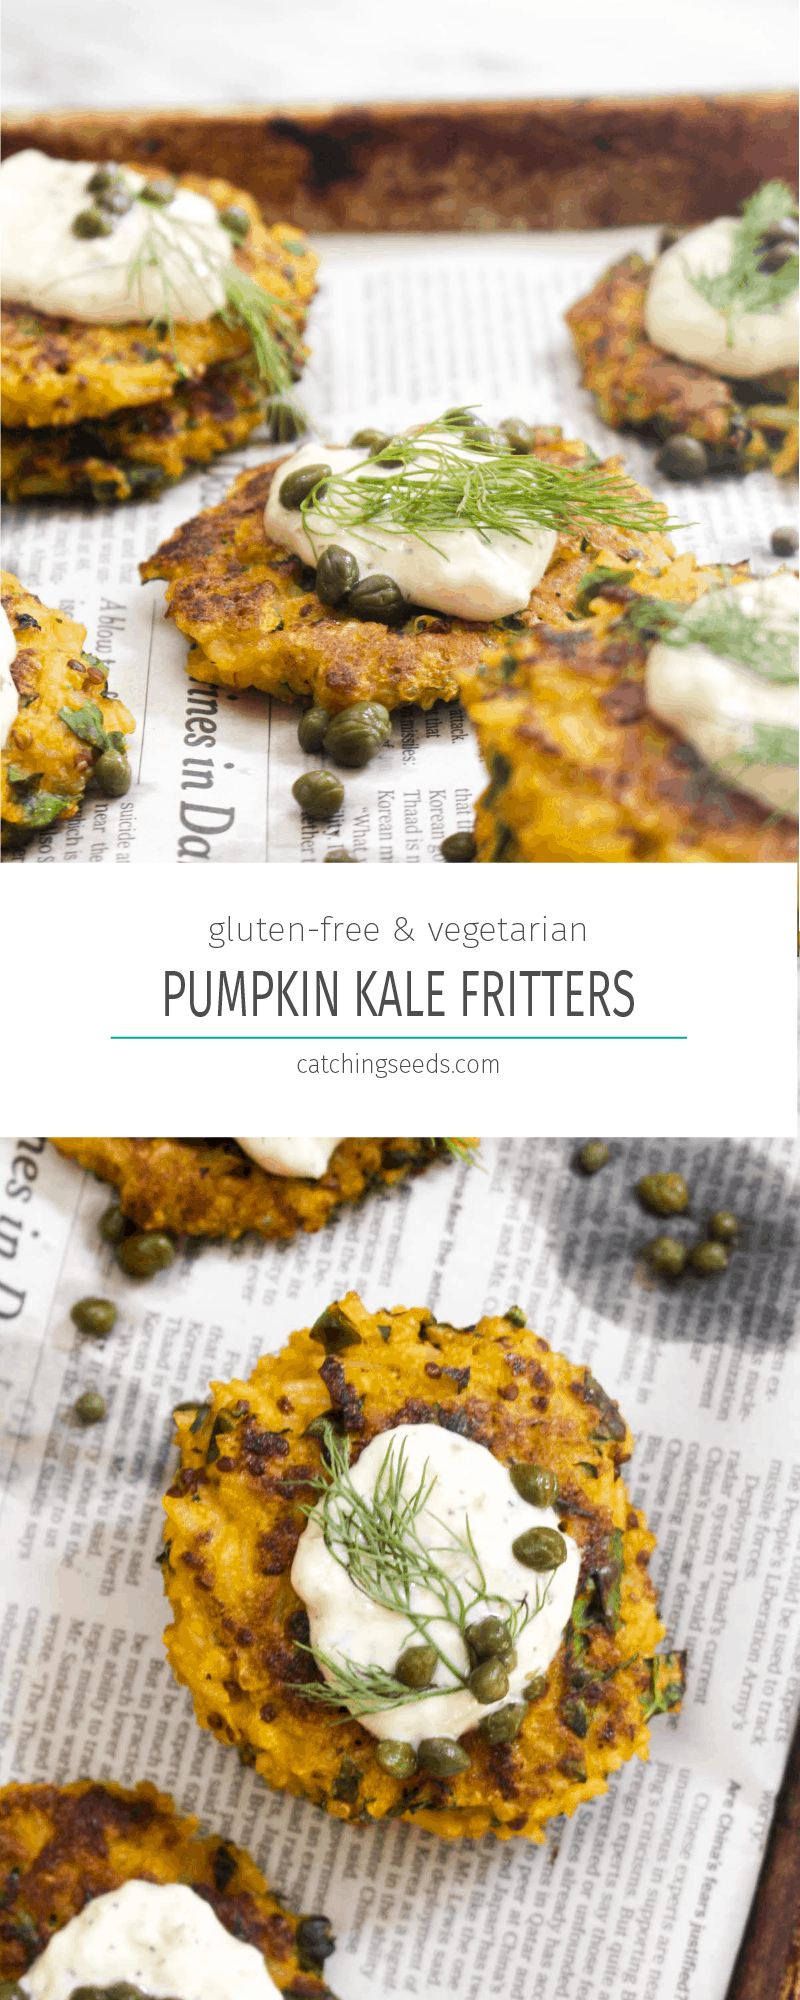 These Vegetarian Pumpkin Kale Fritters are an 8 ingredient recipe with extra crispy golden exteriors and creamy and warm interiors. The perfect side dish for any meal! | Catchingseeds.com